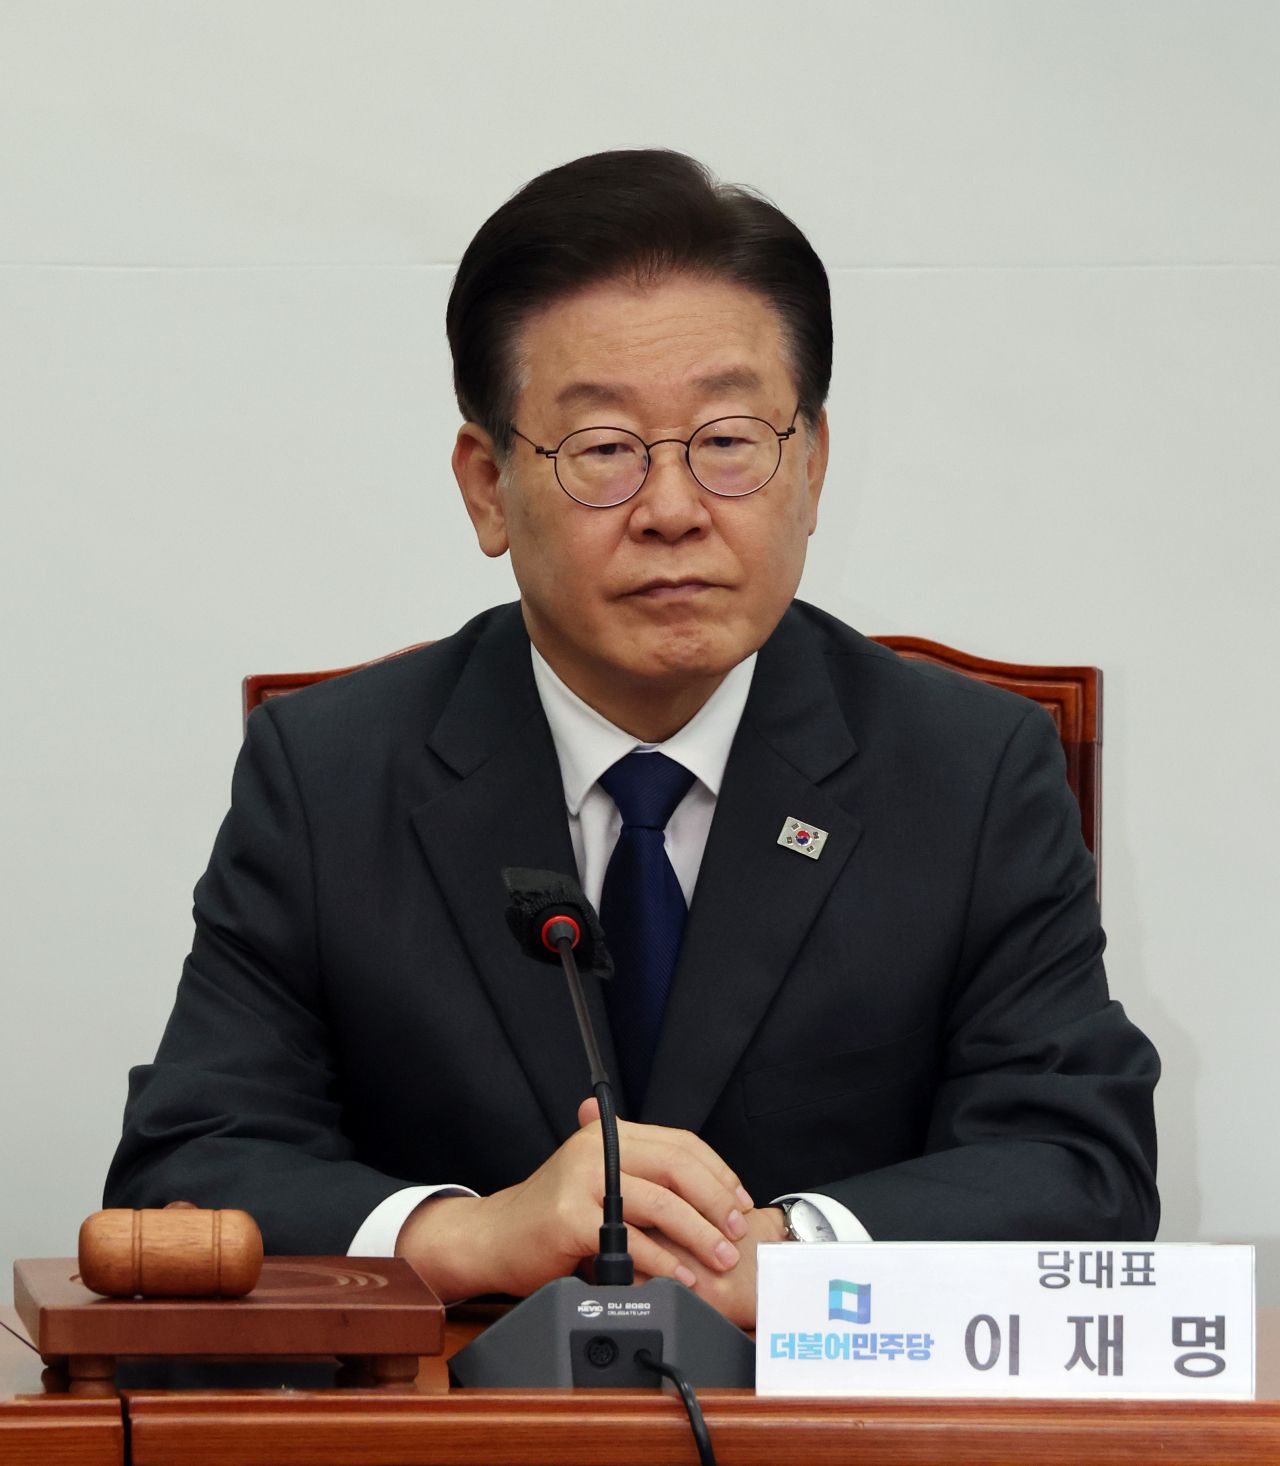 Main opposition leader Lee Jae-myung attends a party meeting at the National Assembly on June 7. (Yonhap)